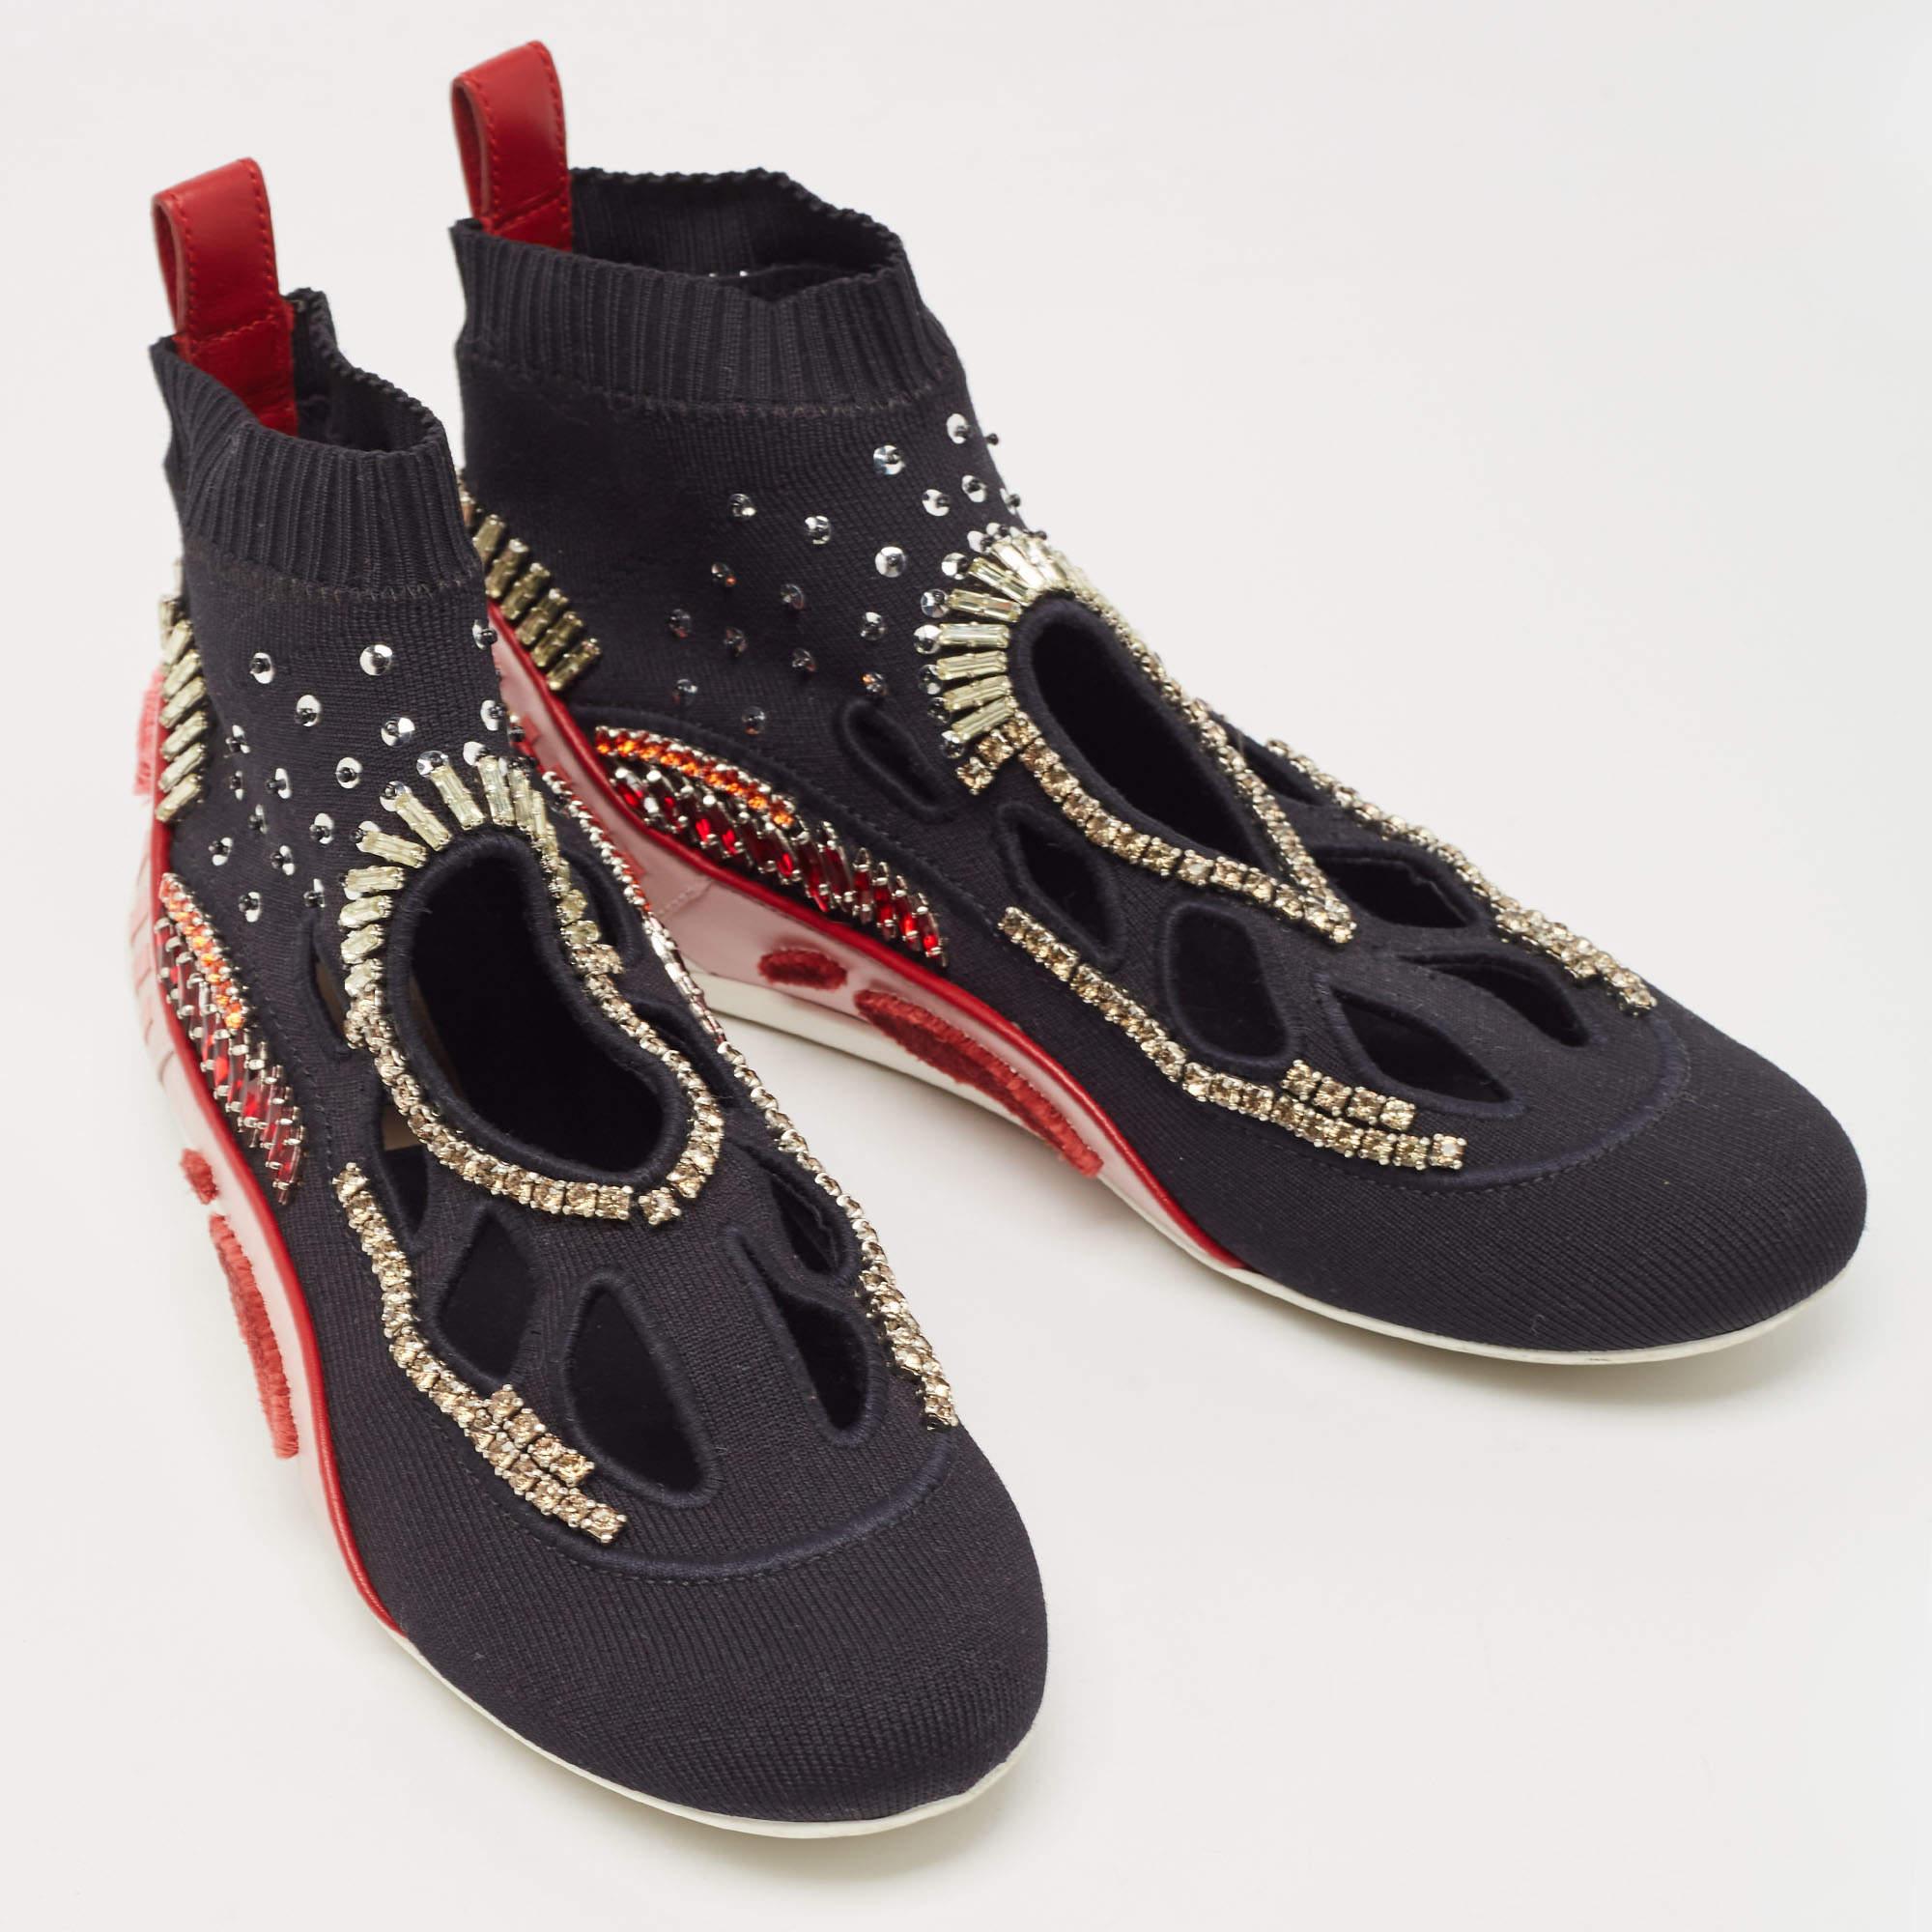 Valentino Black/Pink Knit Fabric High Top Sneakers Size 36 In Good Condition For Sale In Dubai, Al Qouz 2